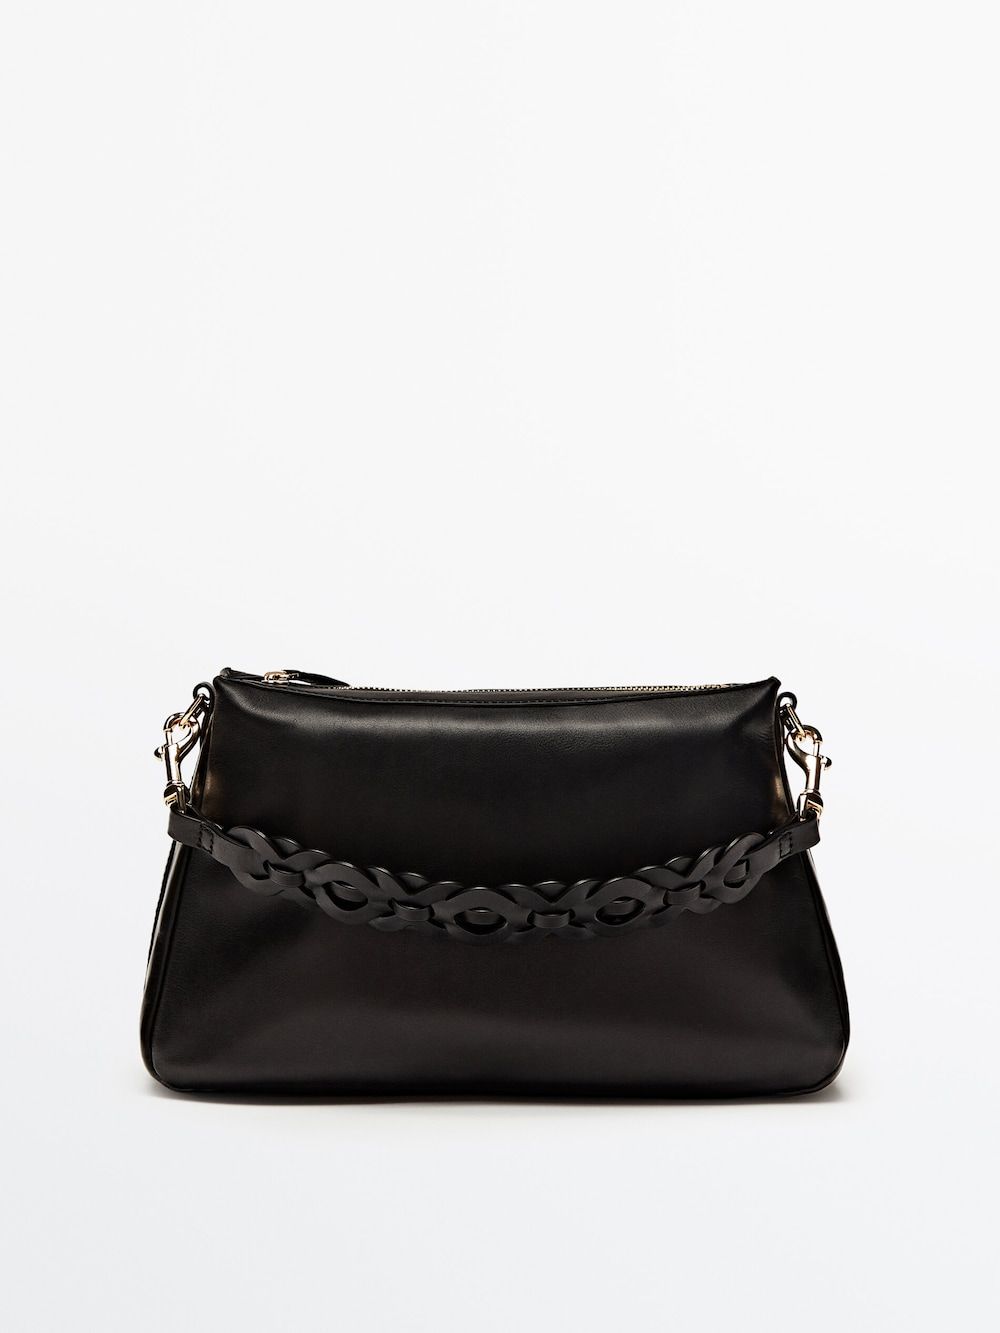 Leather shoulder bag with interwoven strap | Massimo Dutti (US)